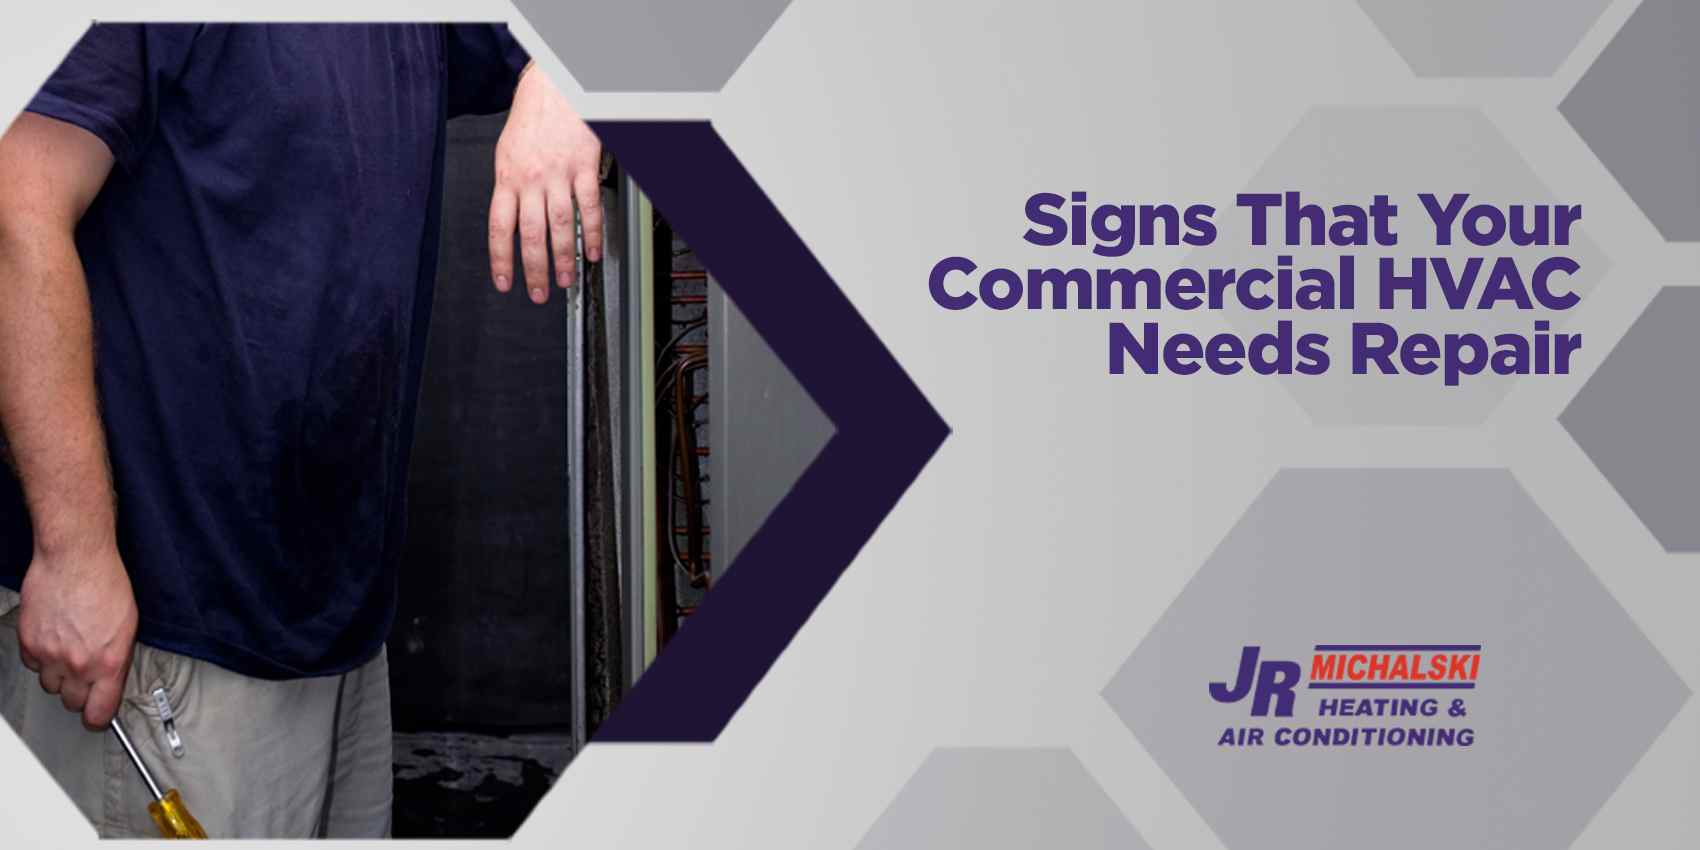 Signs That Your Commercial HVAC Needs Repair